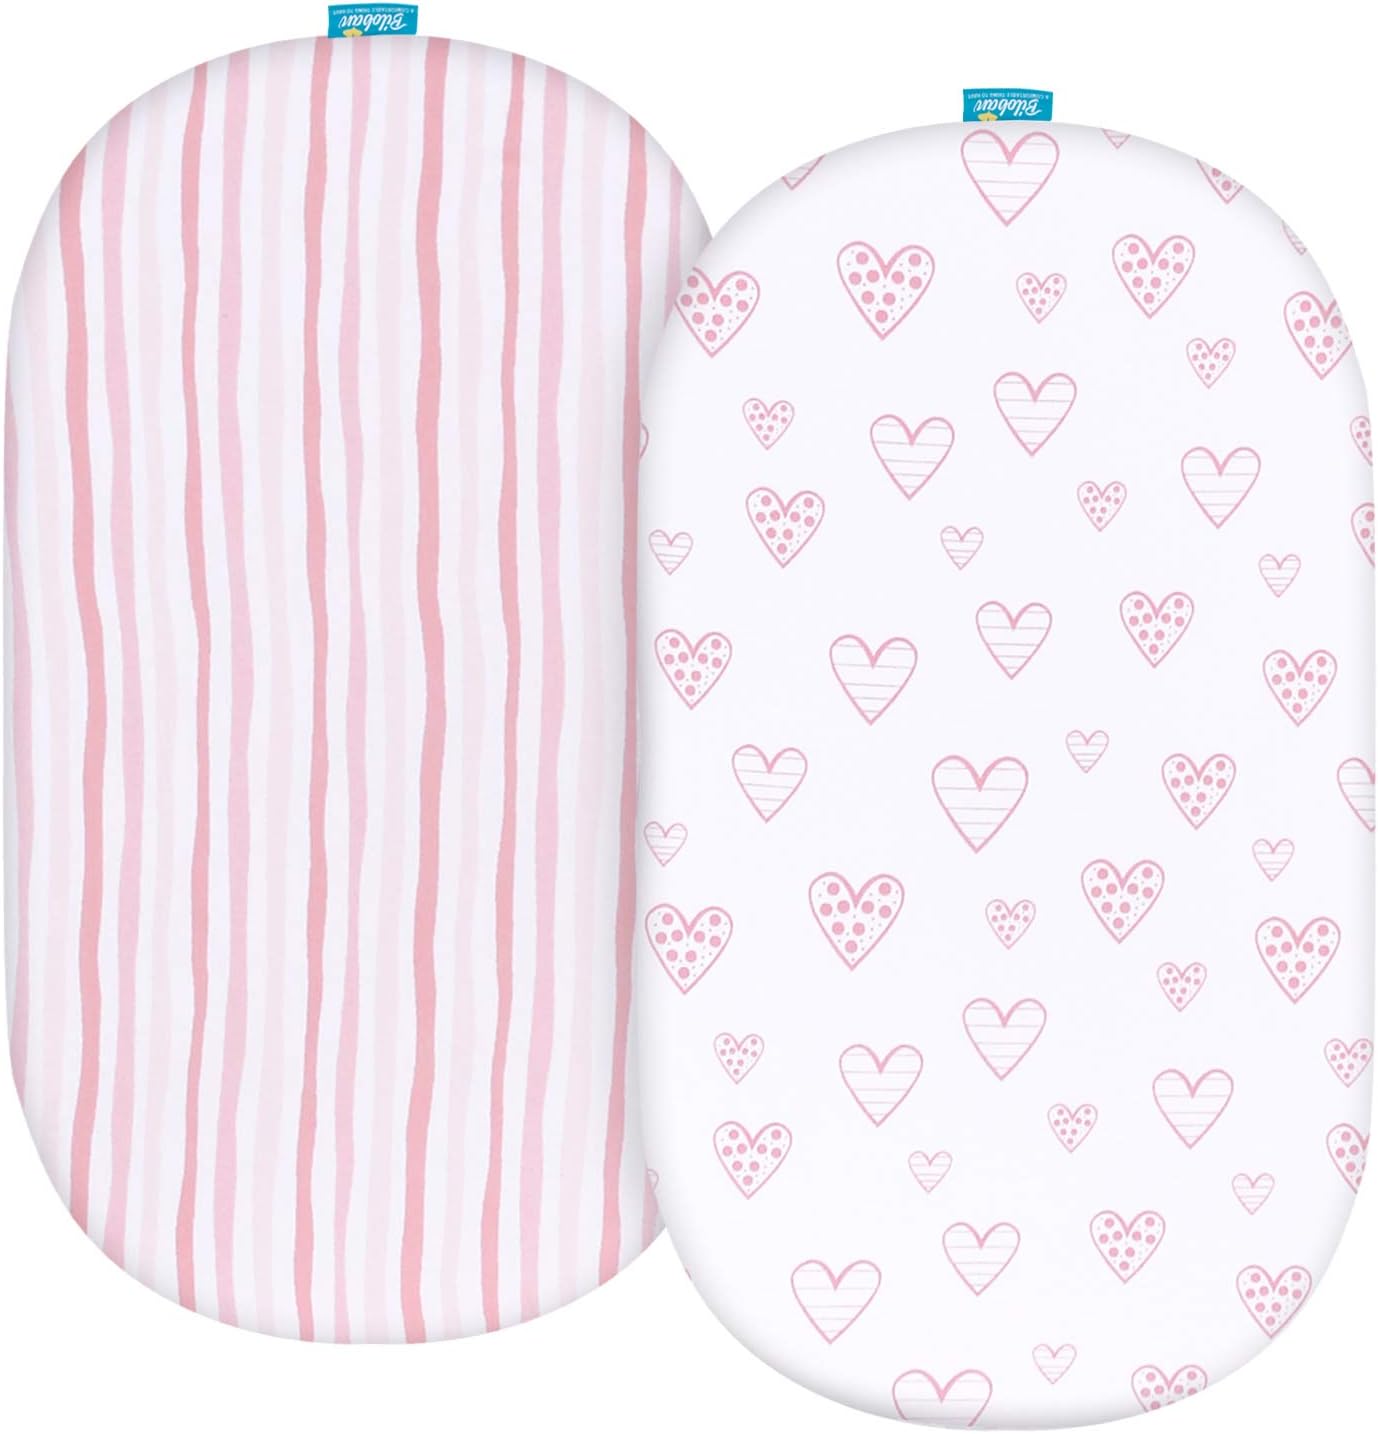 Bassinet Sheets - Fit Fisher-Price Soothing Motions Bassinet, 2 Pack, 100% Jersey Cotton - Biloban Online Store